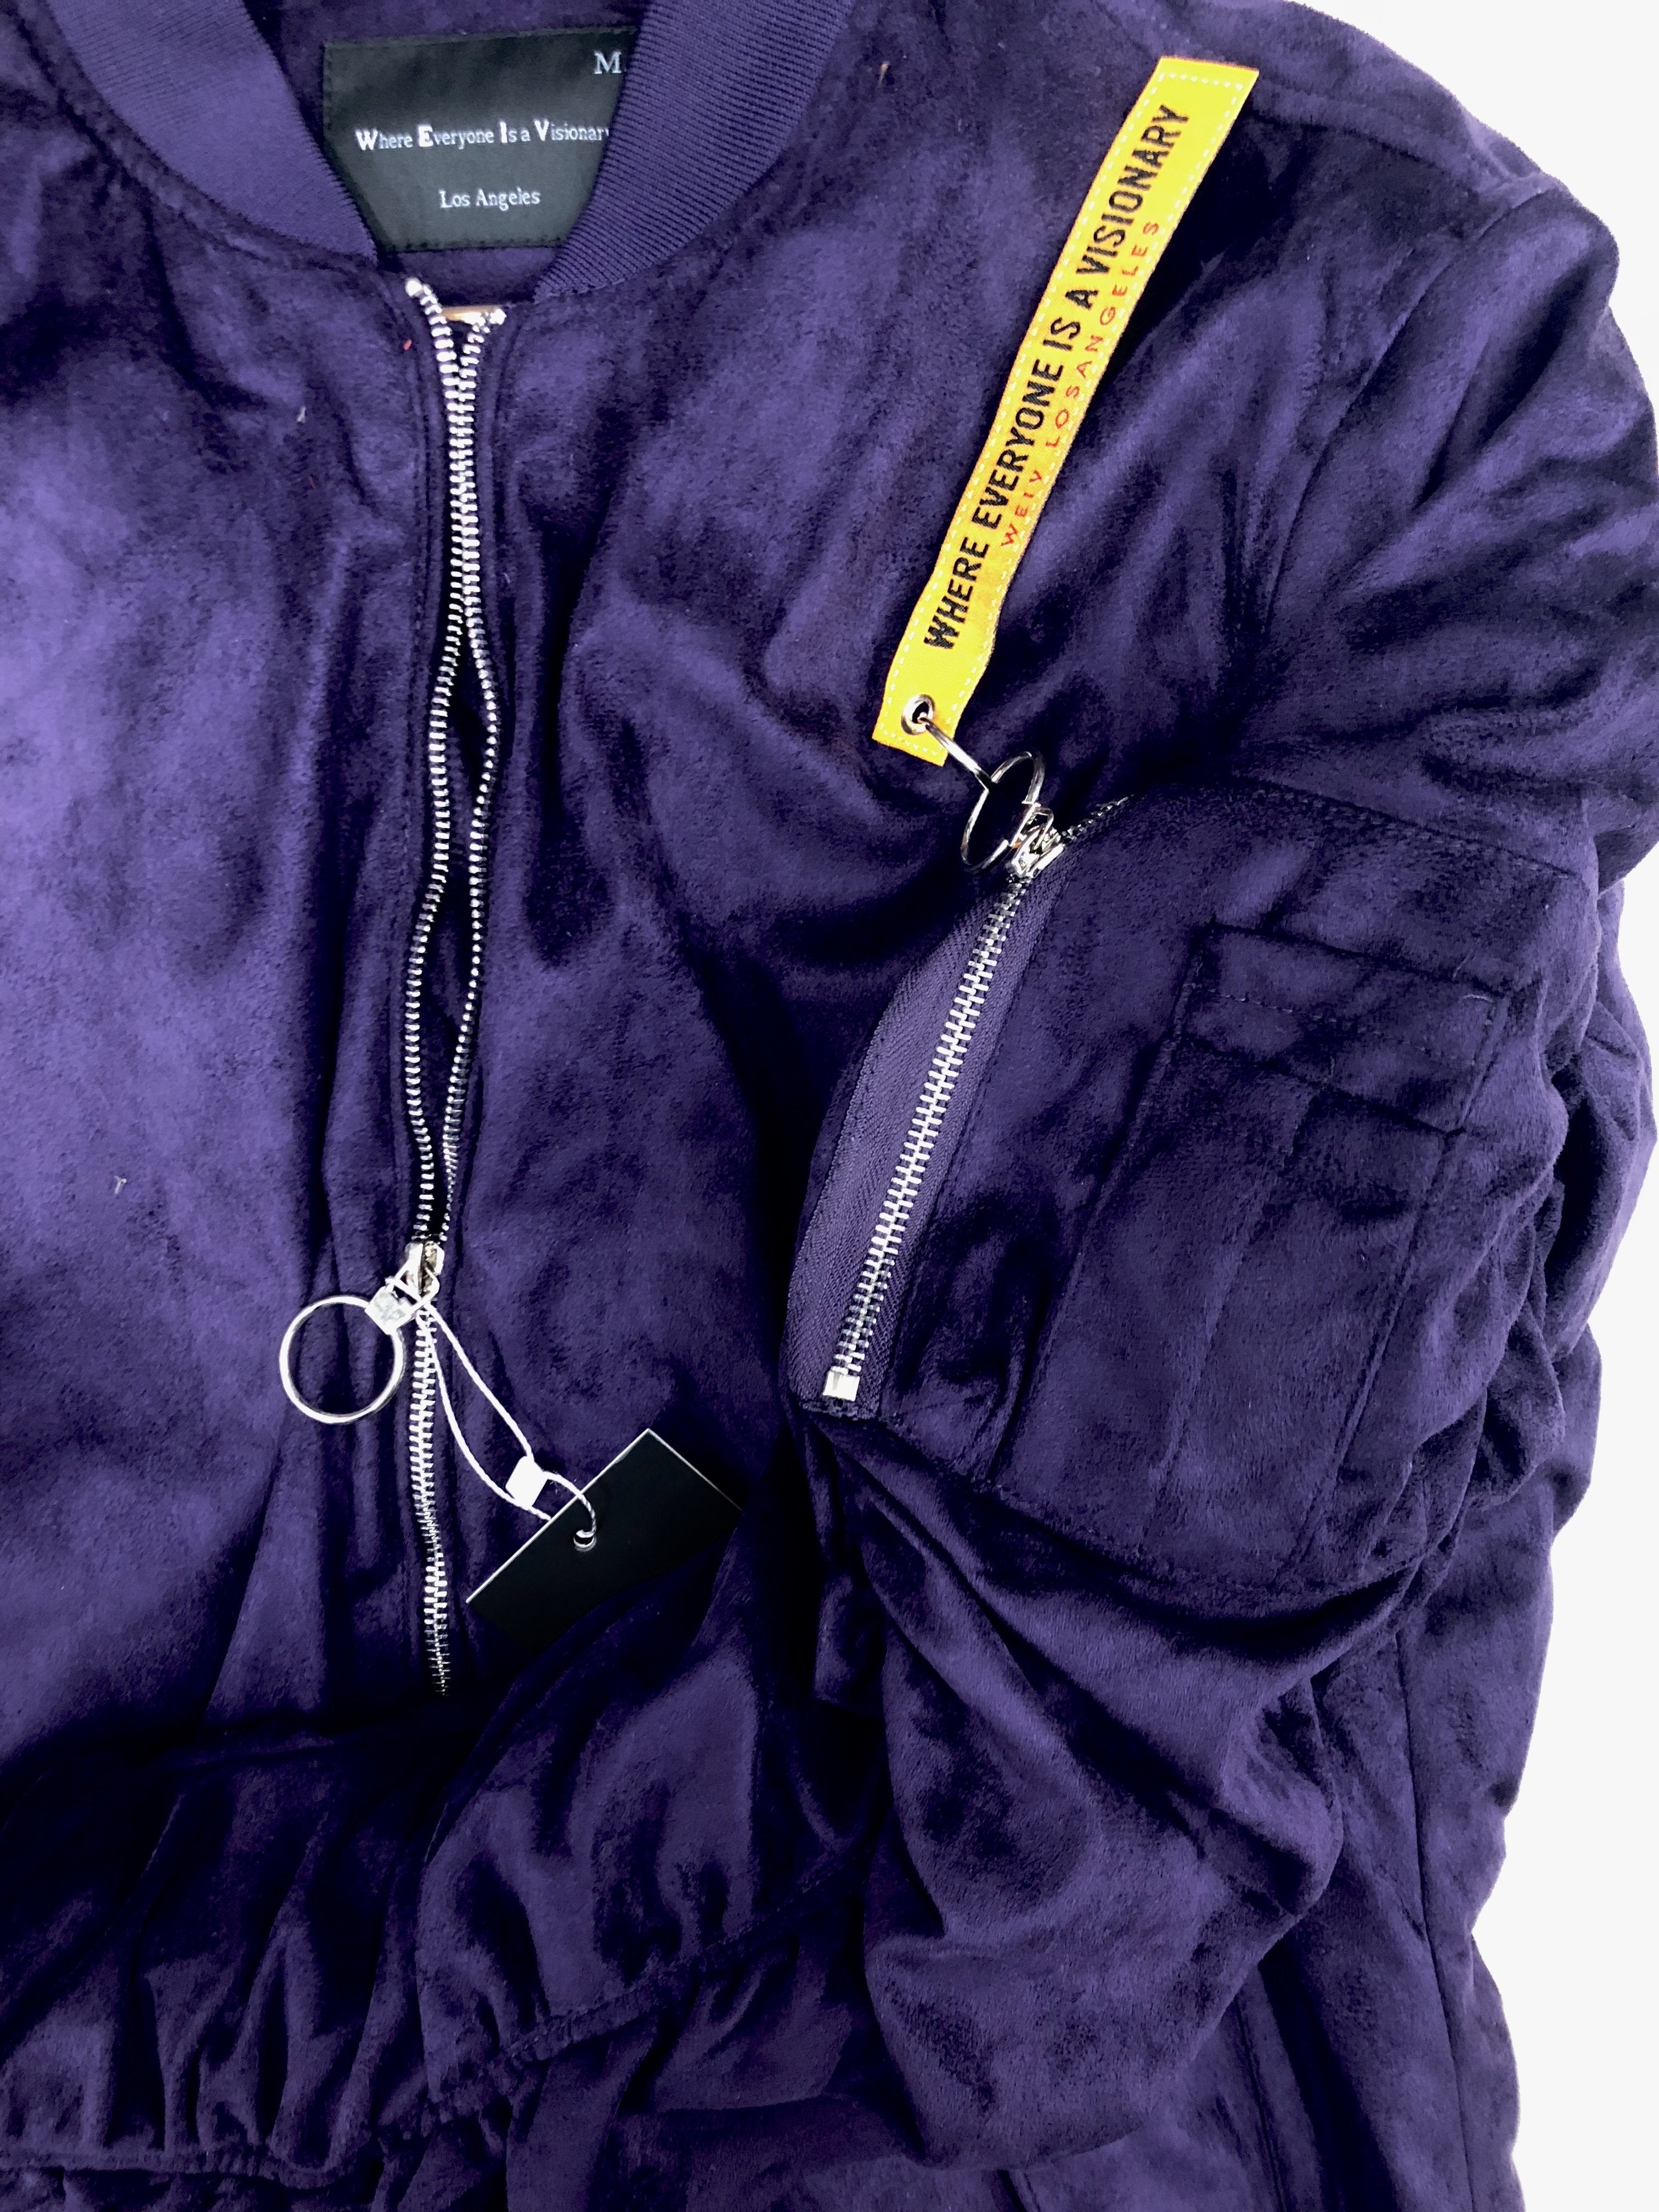 Picture of a Men's Purple Faux Suede Bomber Jacket close up